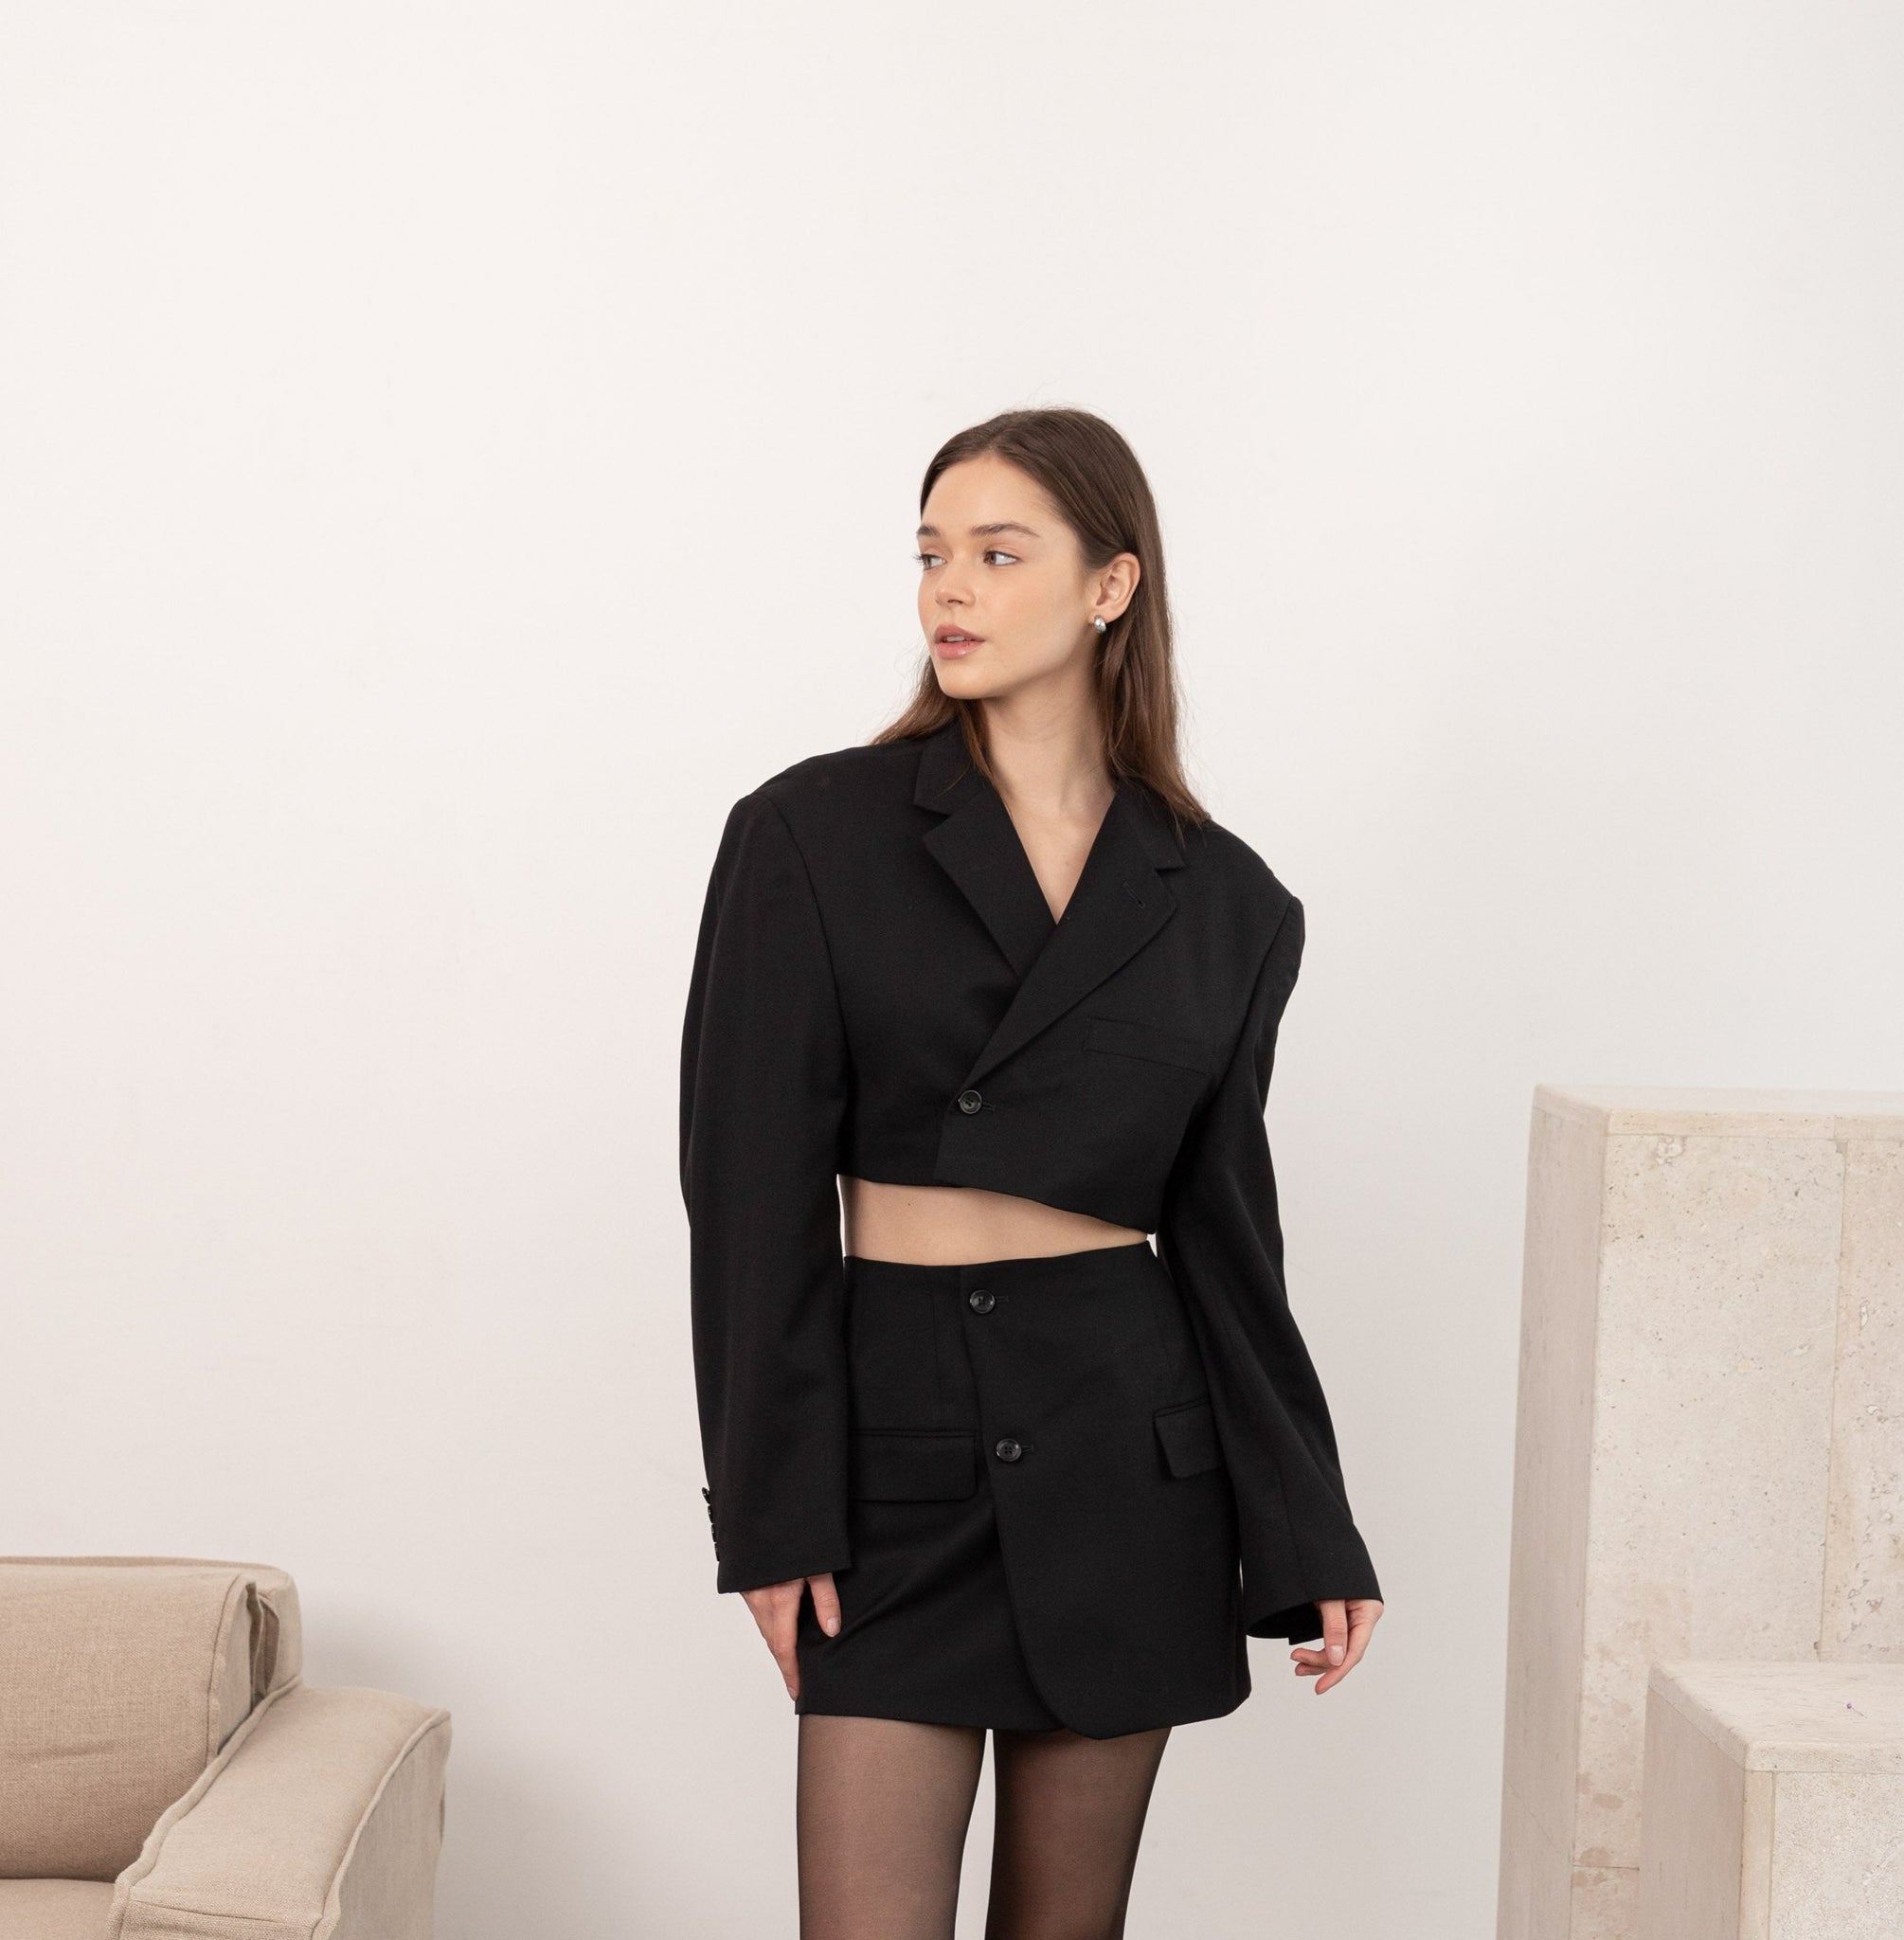 Cropped skirt suit in black